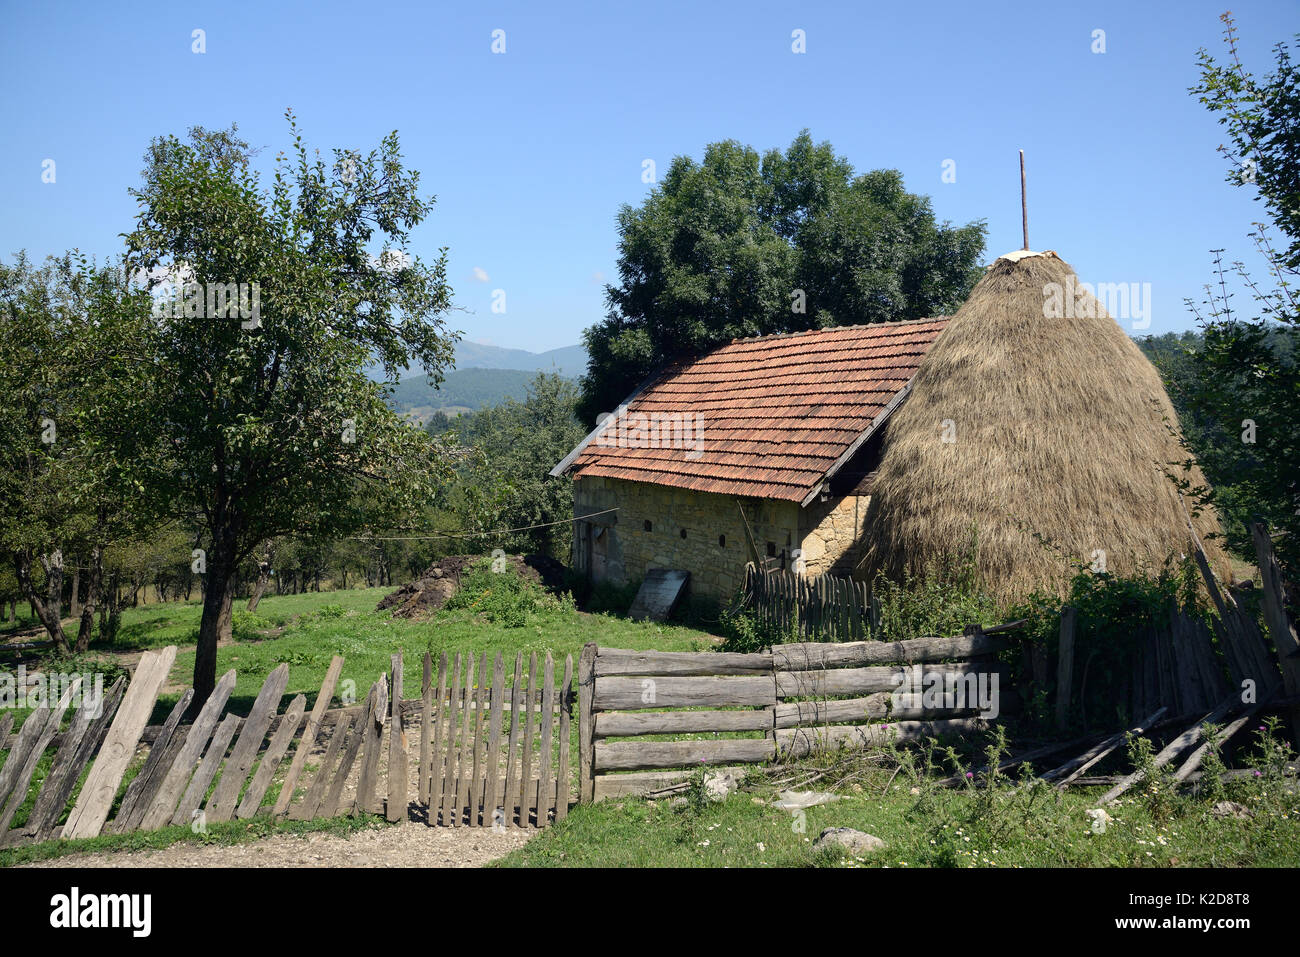 Traditional cottage and haystack in mountain village, near Foca, Bosnia and Herzegovina, July 2014. Stock Photo